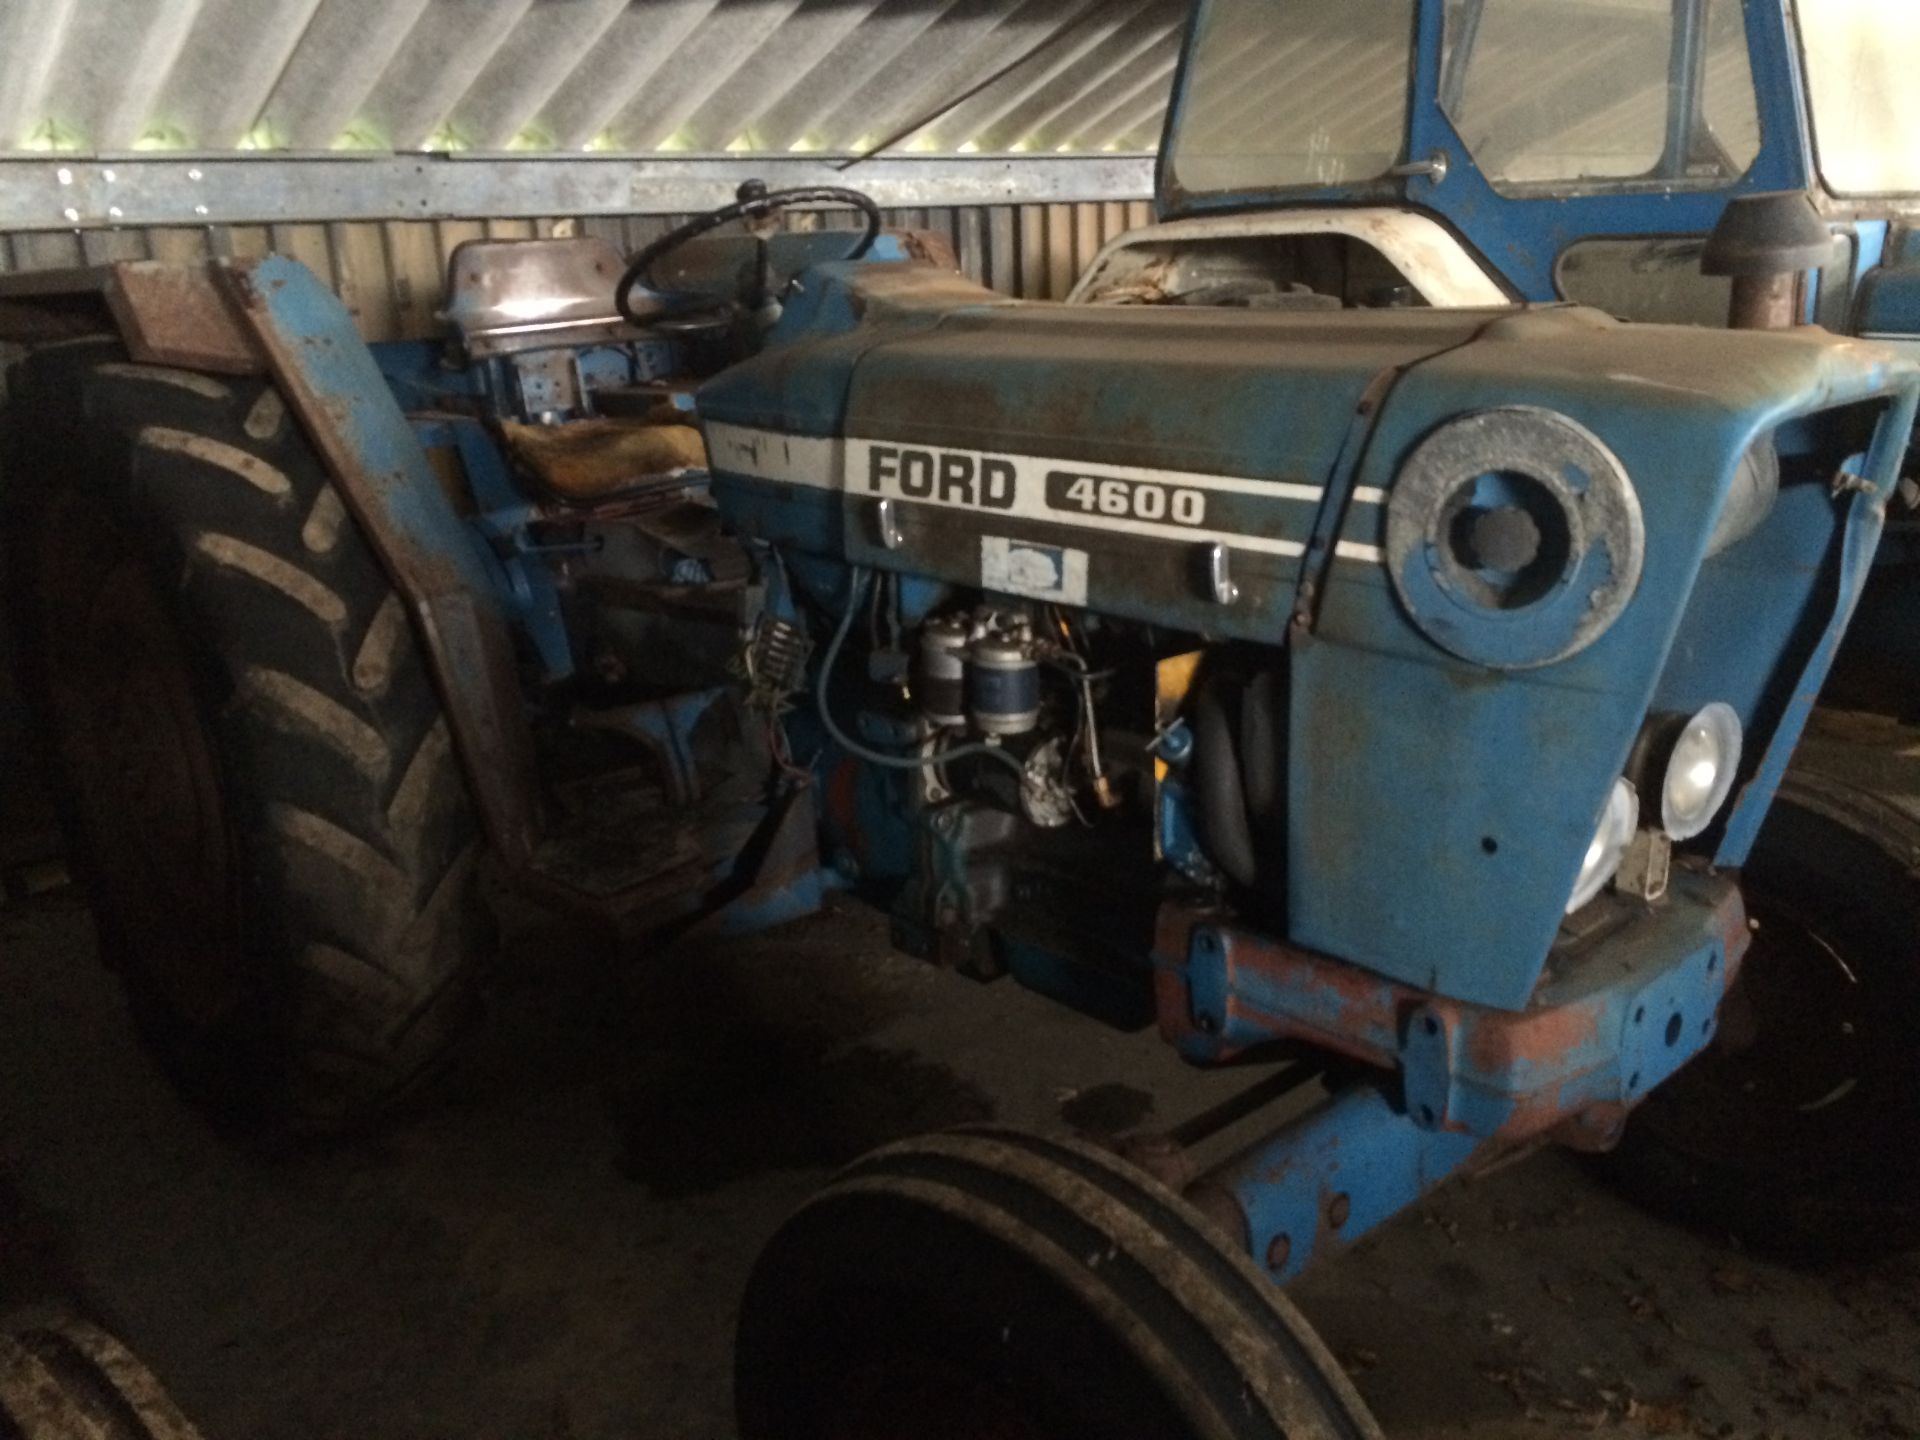 FORD 4600 diesel TRACTOR With cab removed and appearing in ex-farm condition.